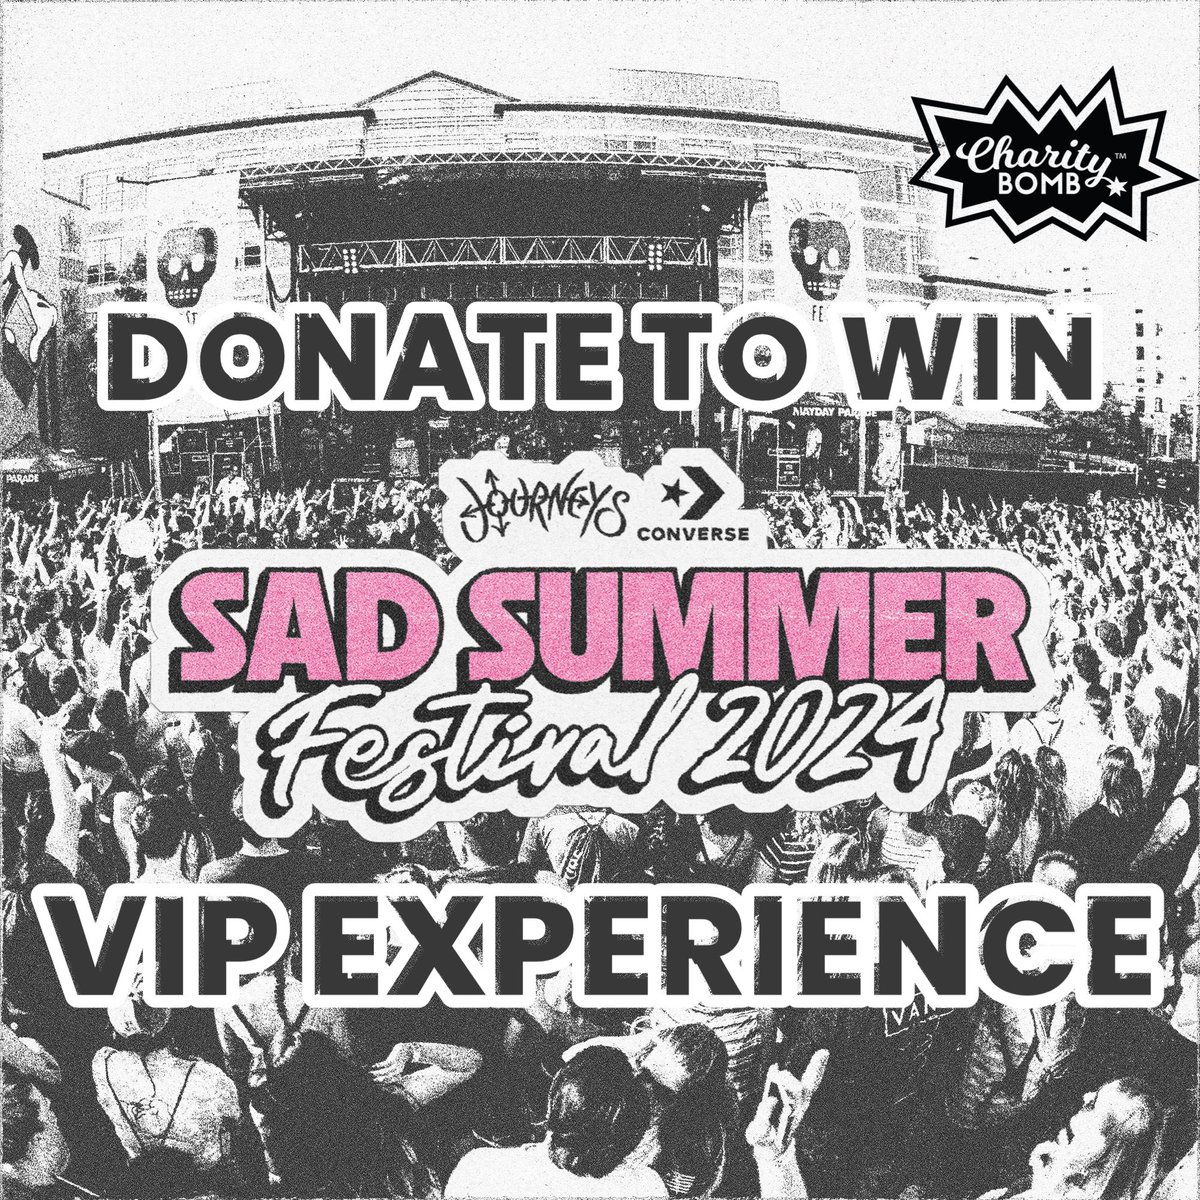 Here's to 5 years of @SadSummerFest presented by @journeys and @Converse ! 🖤☀️  🖤 Donate $10 to help #raisestrongchildren and be entered to win 2 VIP Tix!! Learn more + ENTER HERE: bit.ly/SadSummerVIP